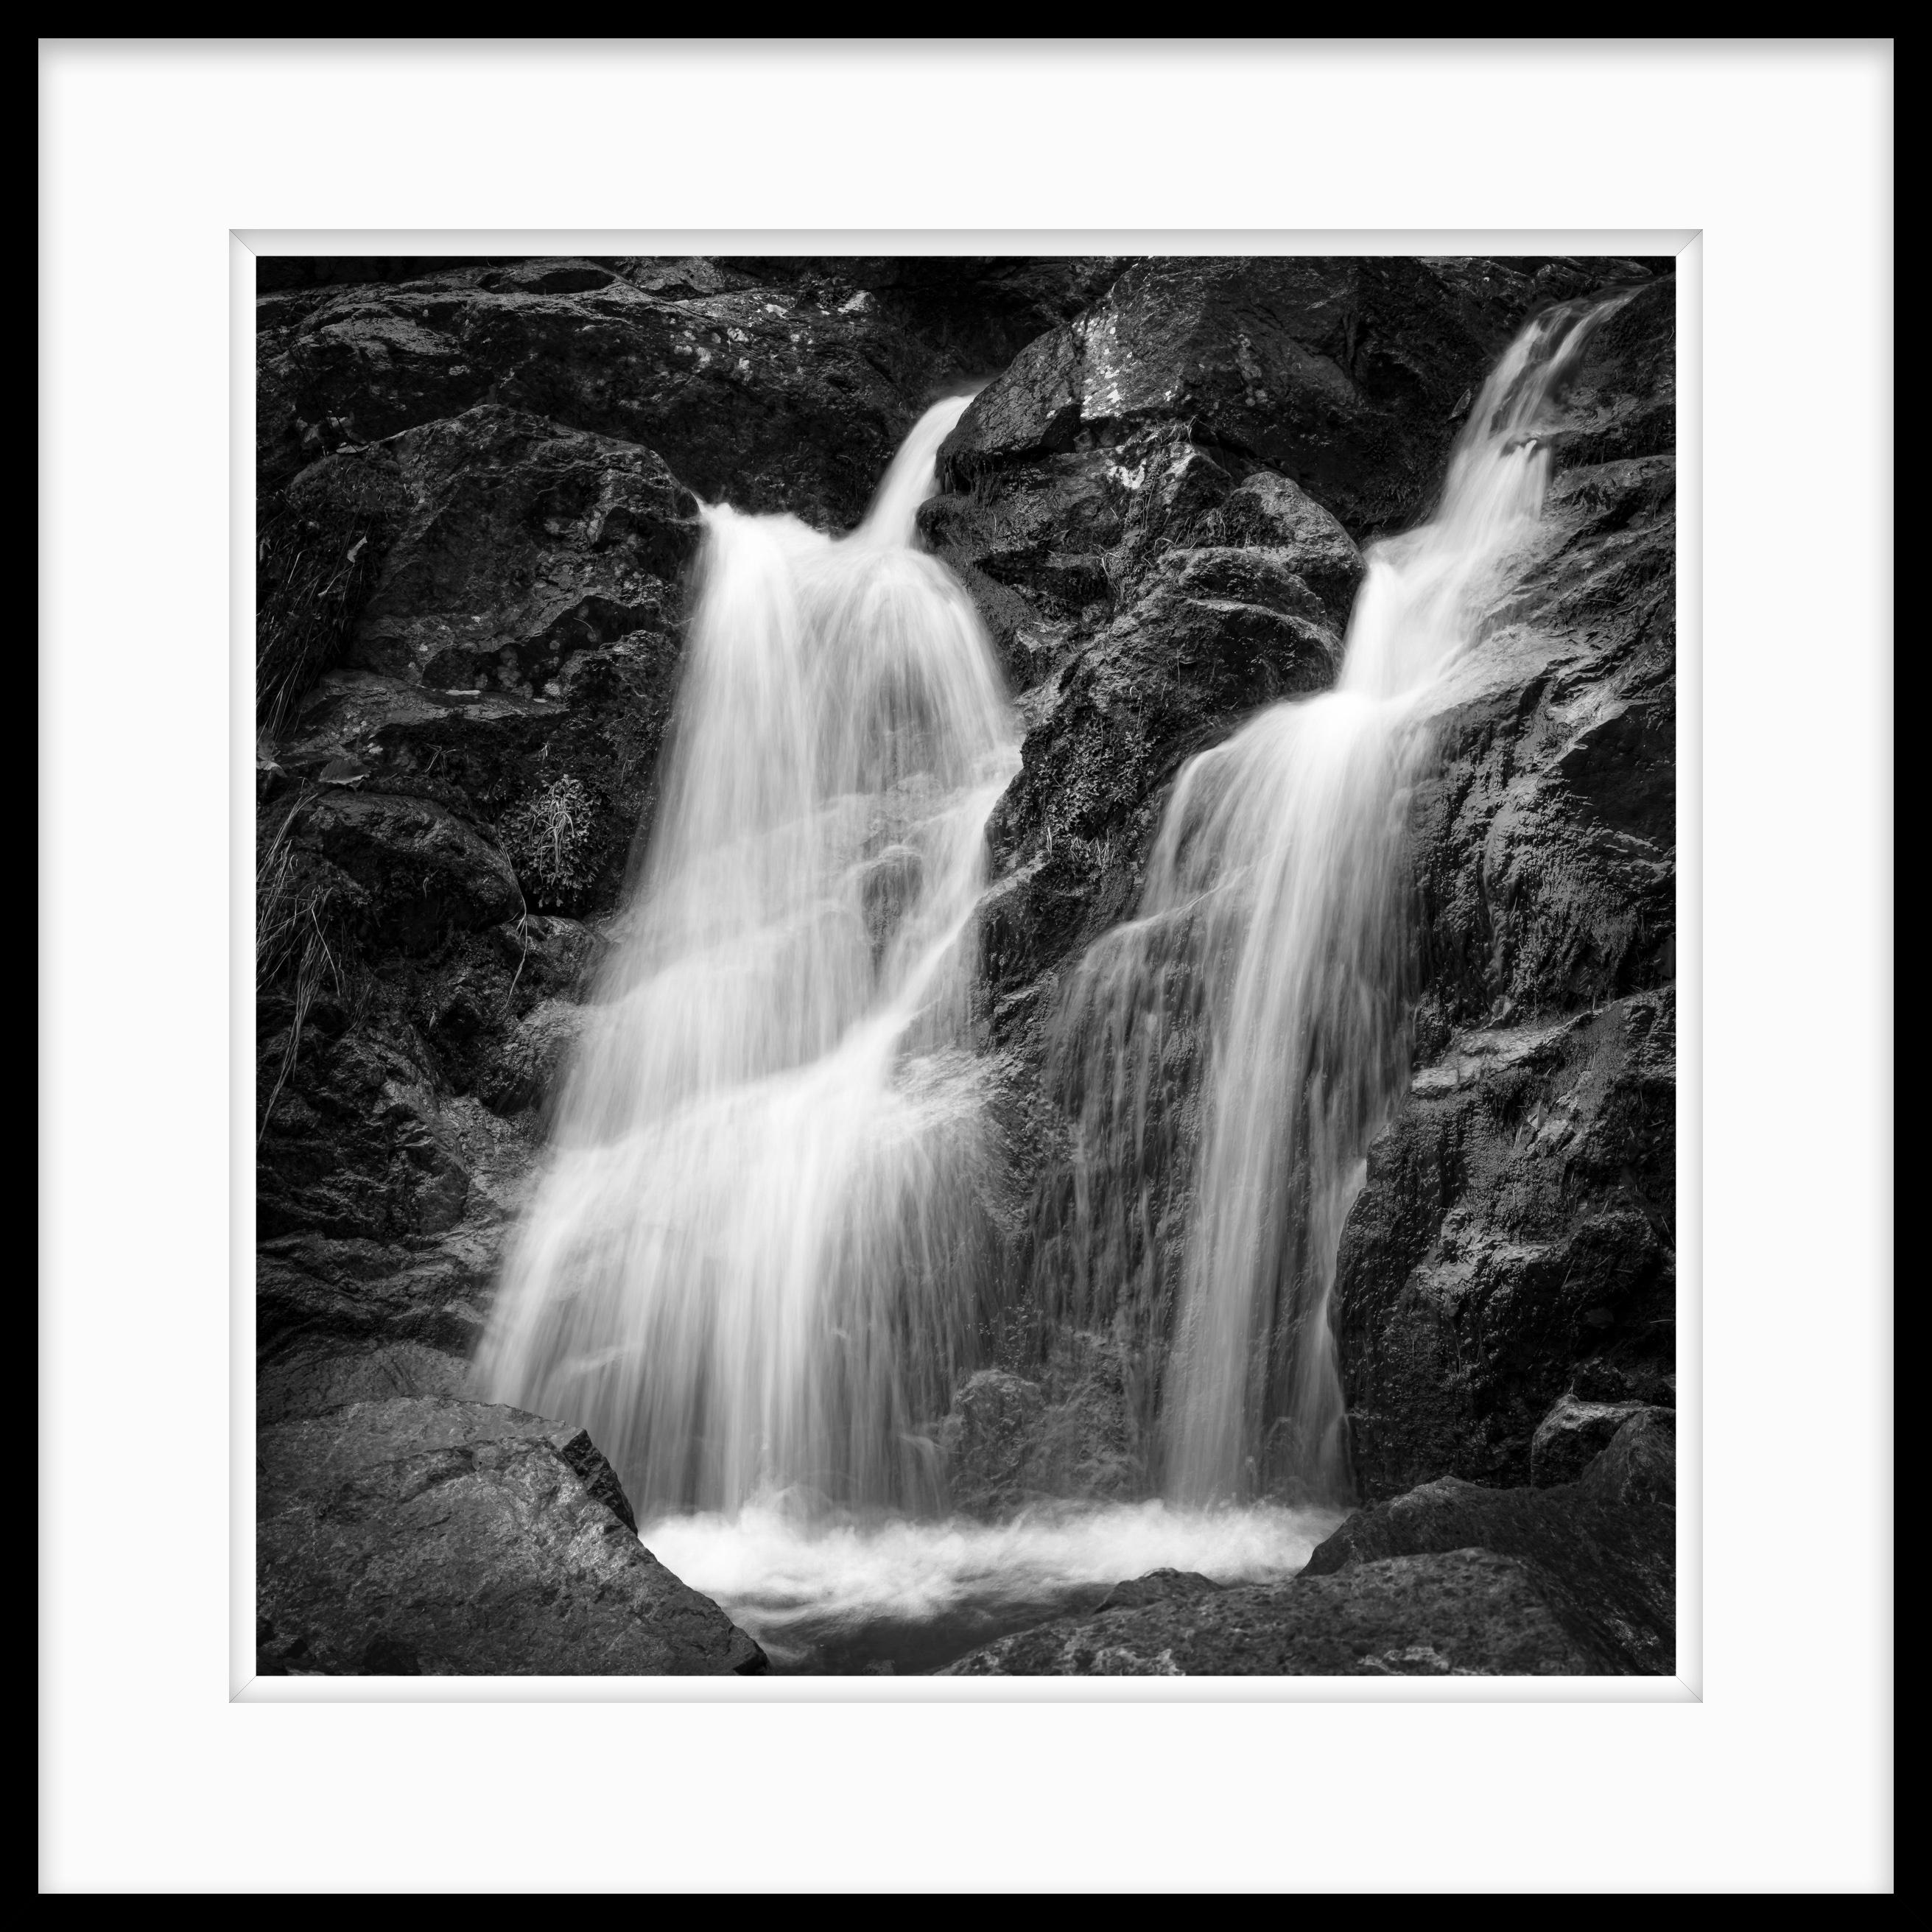 

Limited Edition Black and White Landscape Photograph - Waterfall and Pool

This 